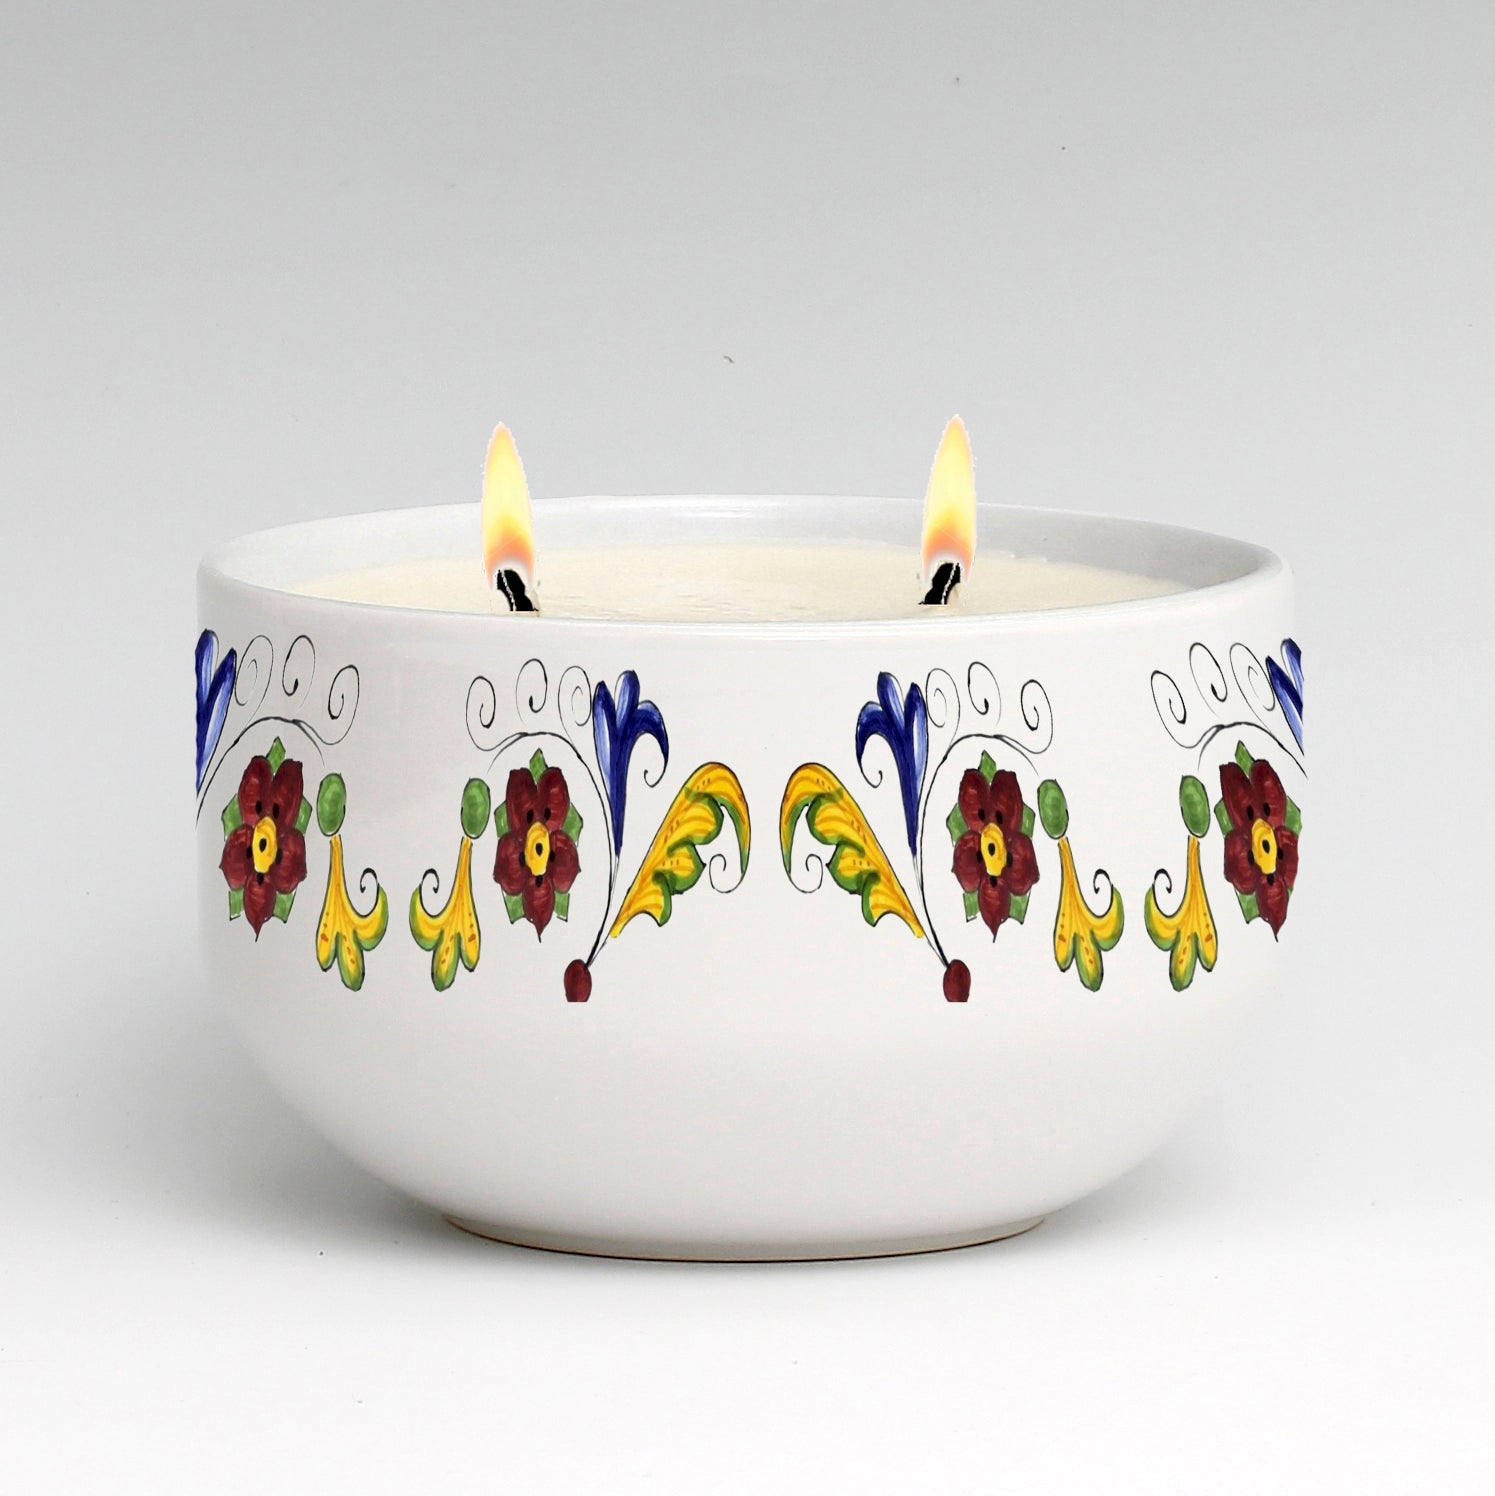 Two Wicks Soy Wax Candle in a Porcelain Bowl - Deruta Style Sublimart –  SublimArt